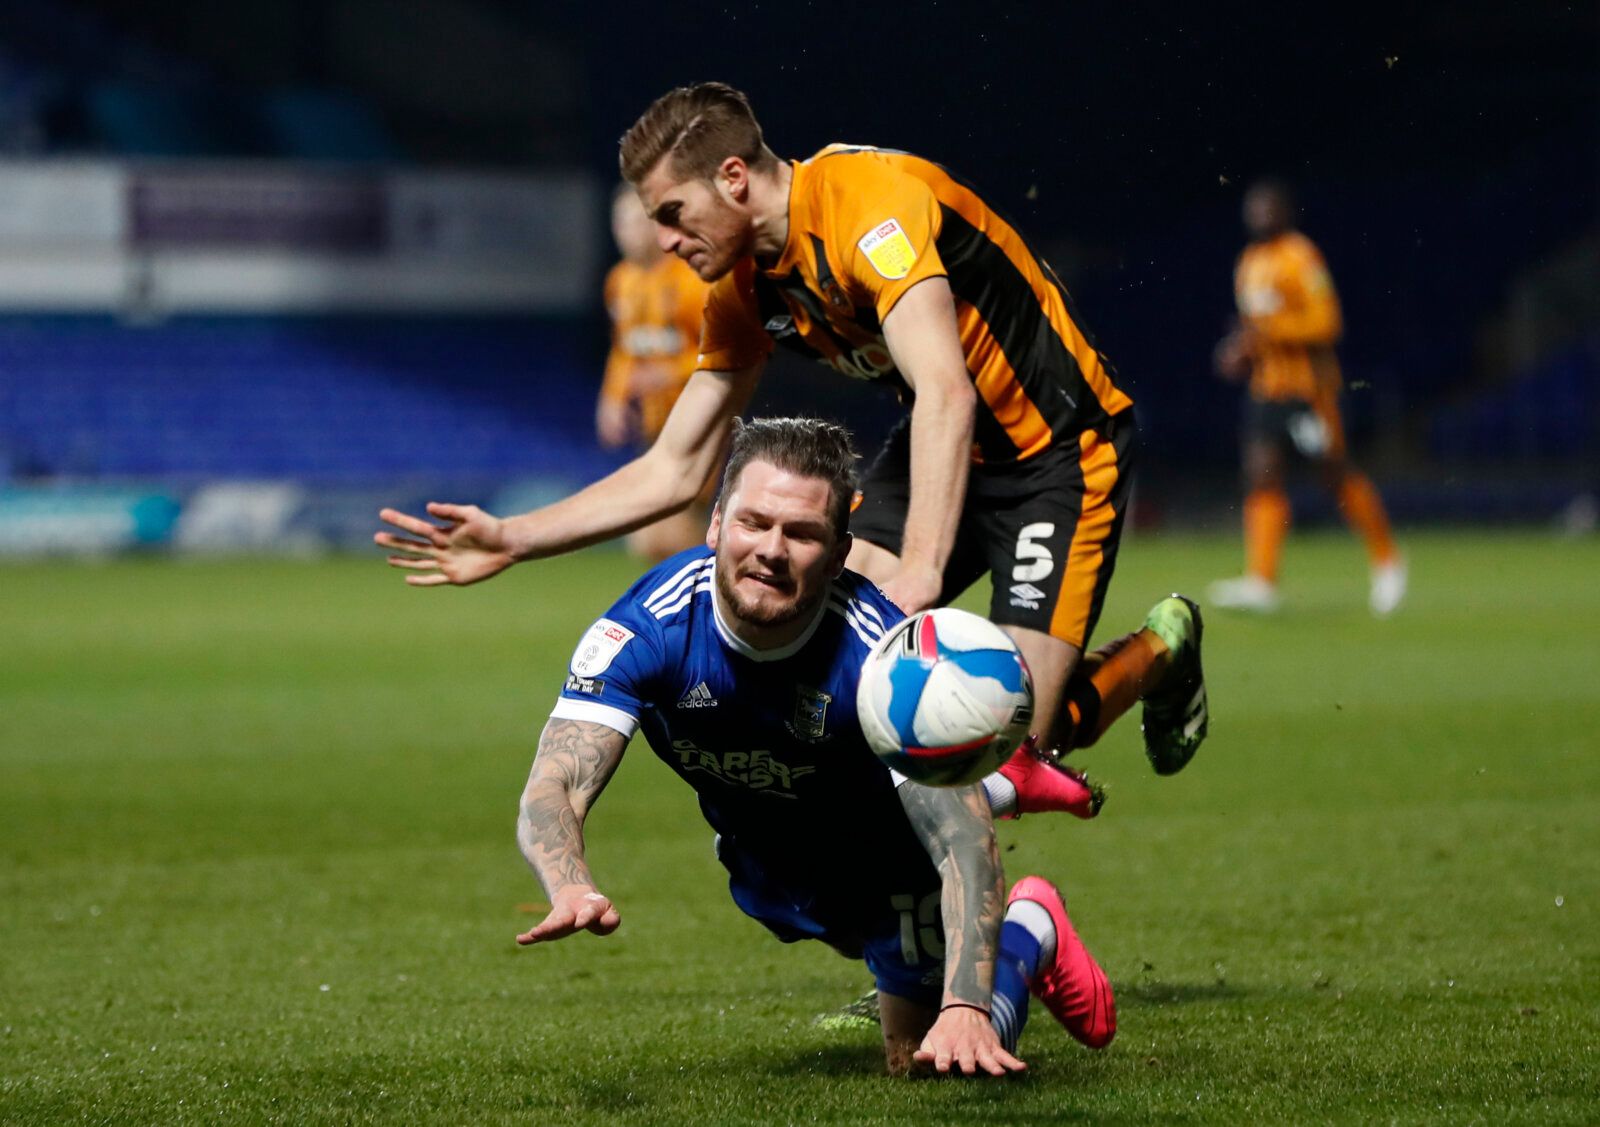 Soccer Football - League One - Ipswich Town v Hull City - Portman Road, Ipswich, Britain - November 24, 2020 Ipswich's James Norwood in action with Hull's Reece Burke Action Images/Paul Childs EDITORIAL USE ONLY. No use with unauthorized audio, video, data, fixture lists, club/league logos or 'live' services. Online in-match use limited to 75 images, no video emulation. No use in betting, games or single club /league/player publications.  Please contact your account representative for further de